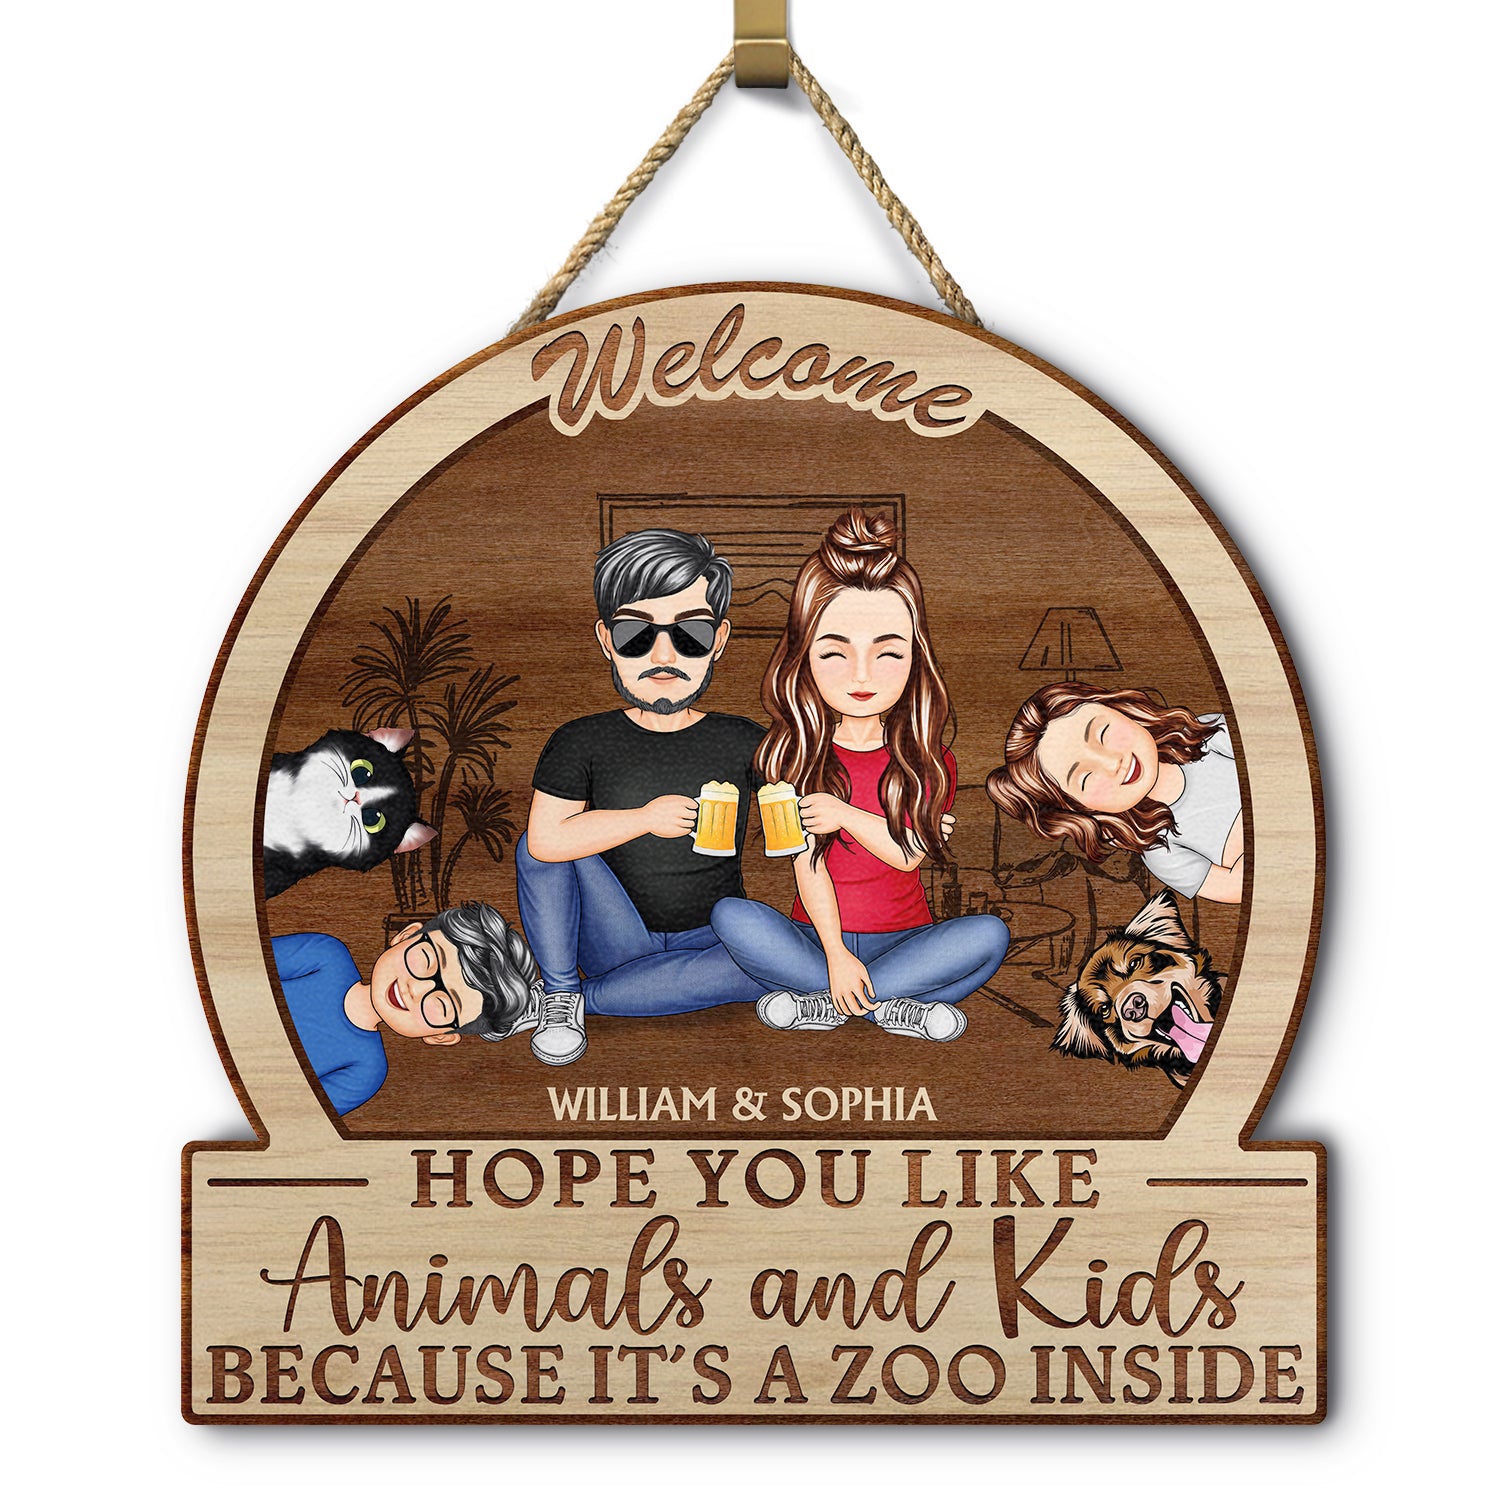 Family Hope You Like Animals And Kids - Anniversary, Birthday, Home Decor Gift For Husband, Wife, Couple Pet Loves - Personalized Custom Shaped Wood Sign